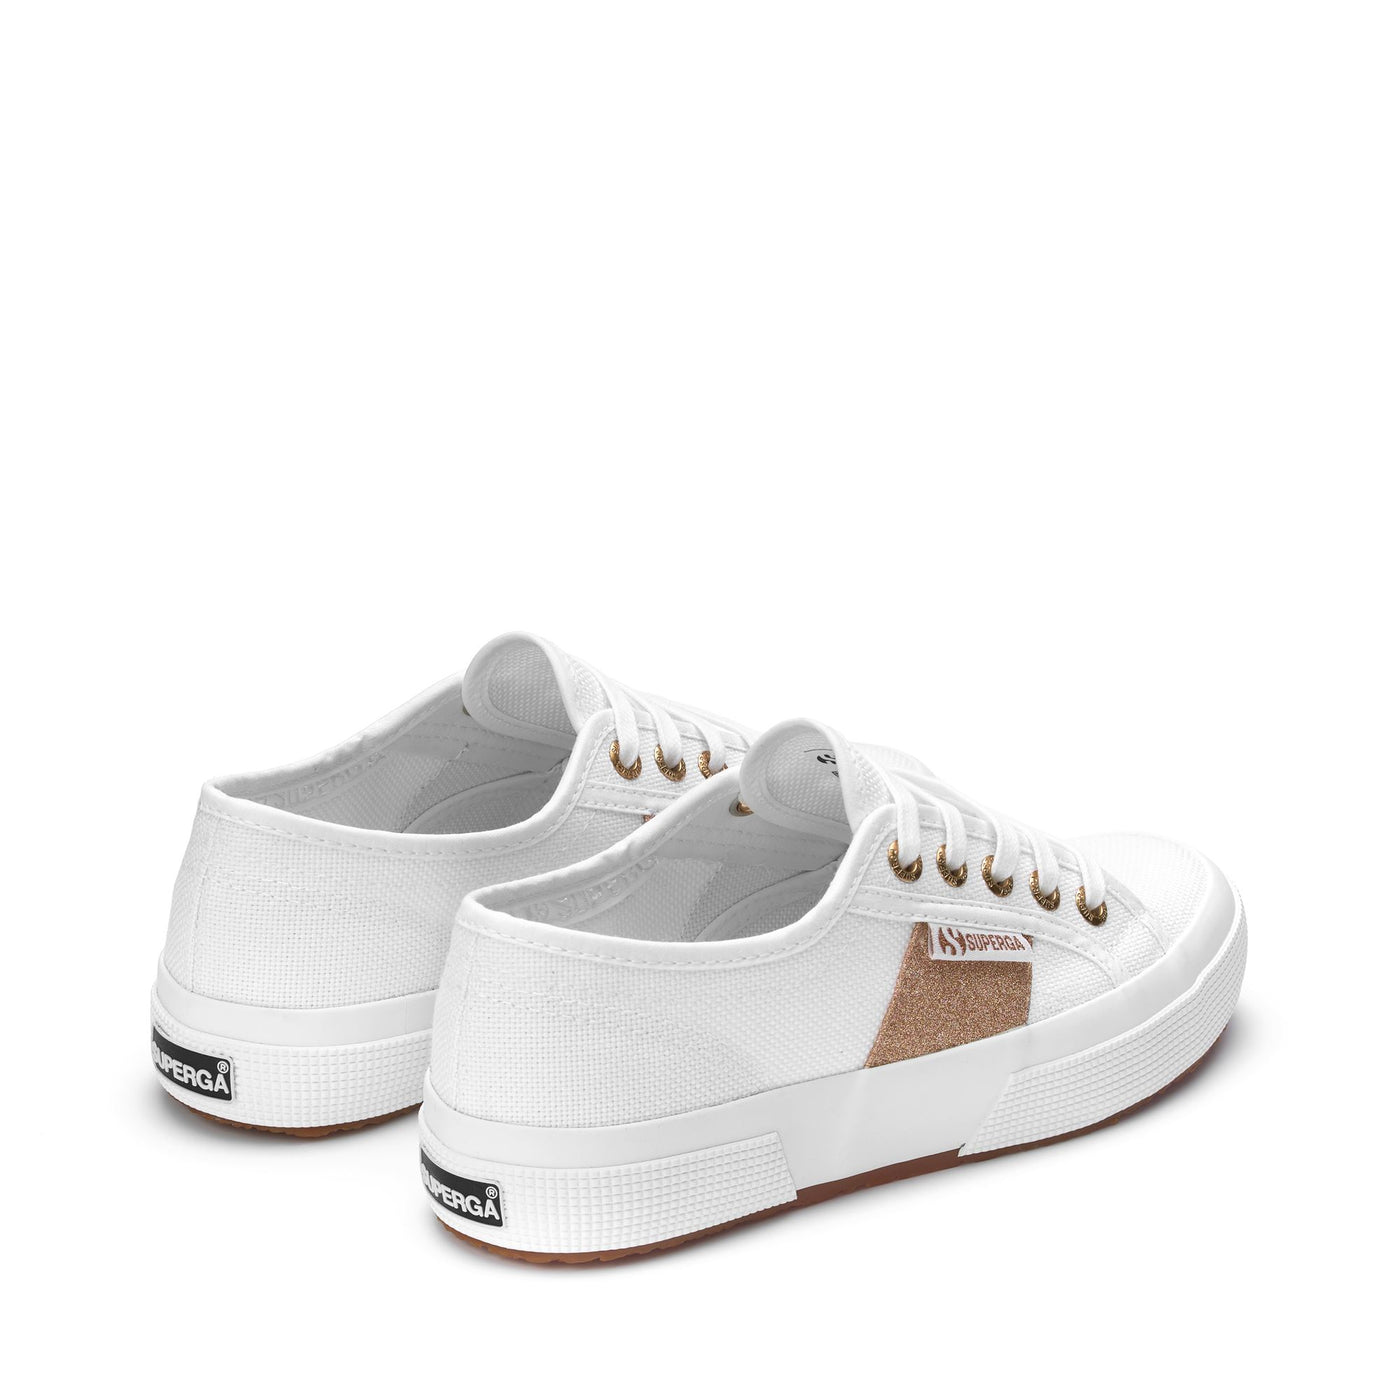 Le Superga Woman 2750 PATCHES GLITTER Sneaker WHITE-WARM GOLD Dressed Side (jpg Rgb)		